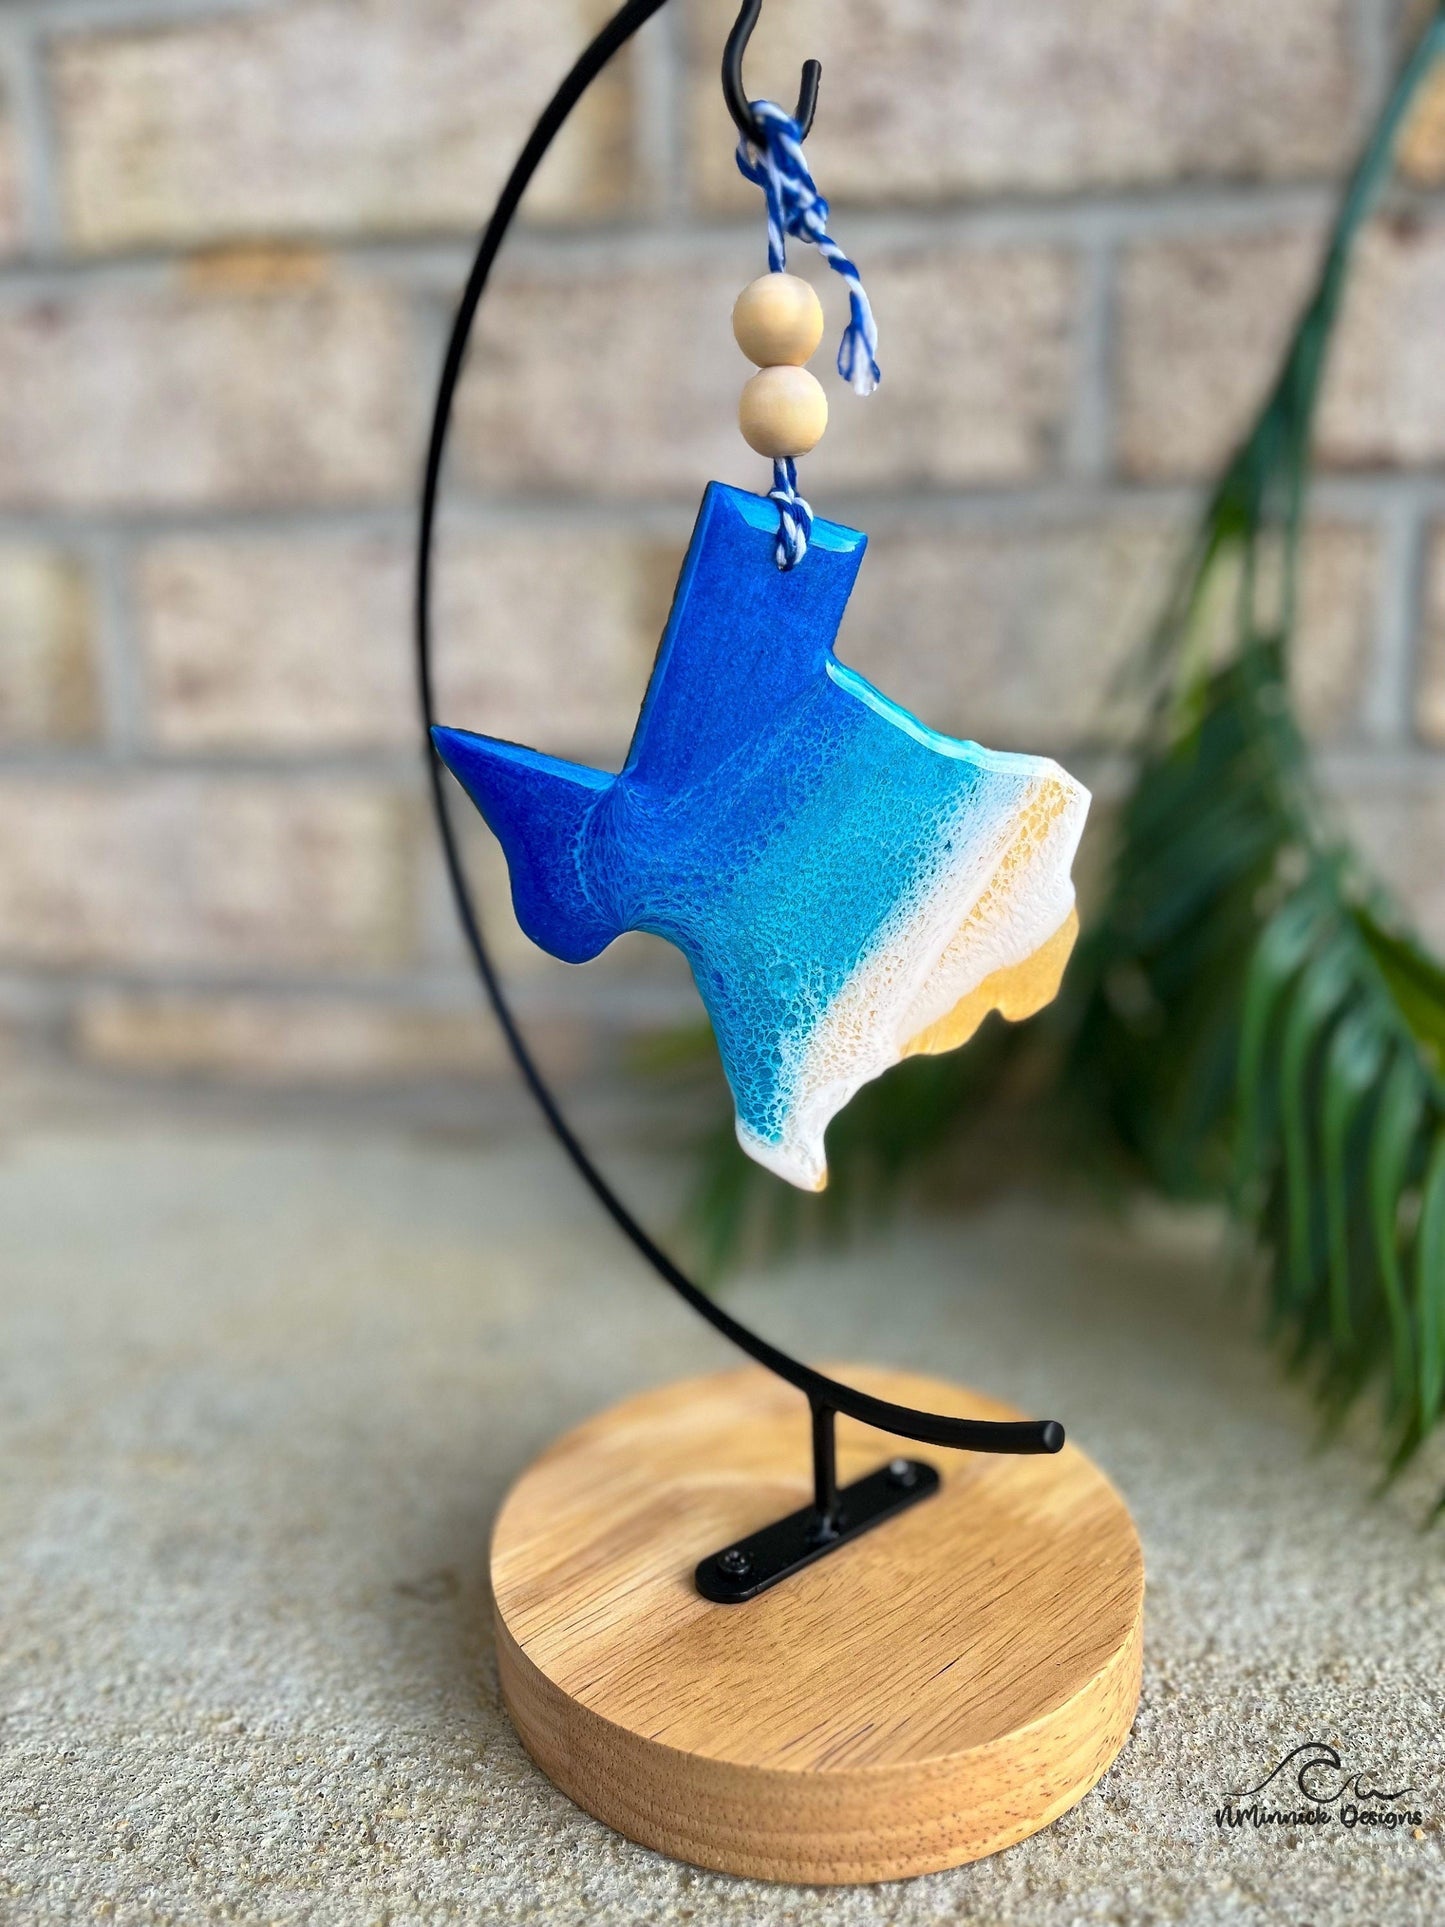 Texas ornament with ocean resin art hanging from an ornament stand.